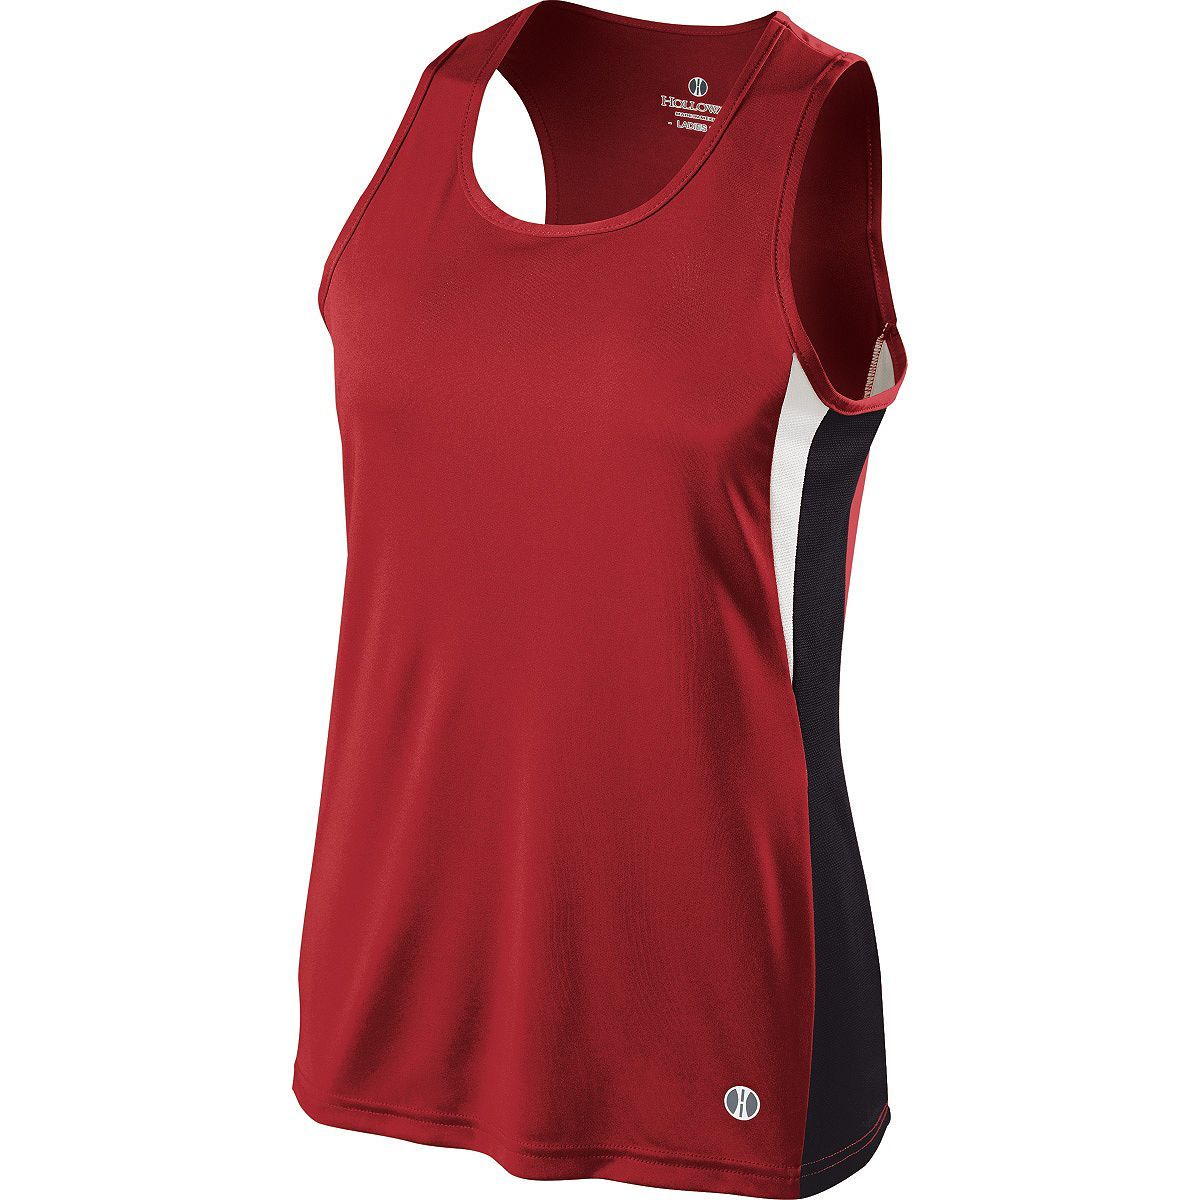 Holloway Ladies Vertical Singlet in Scarlet/Black/White  -Part of the Ladies, Track-Field, Holloway, Shirts product lines at KanaleyCreations.com